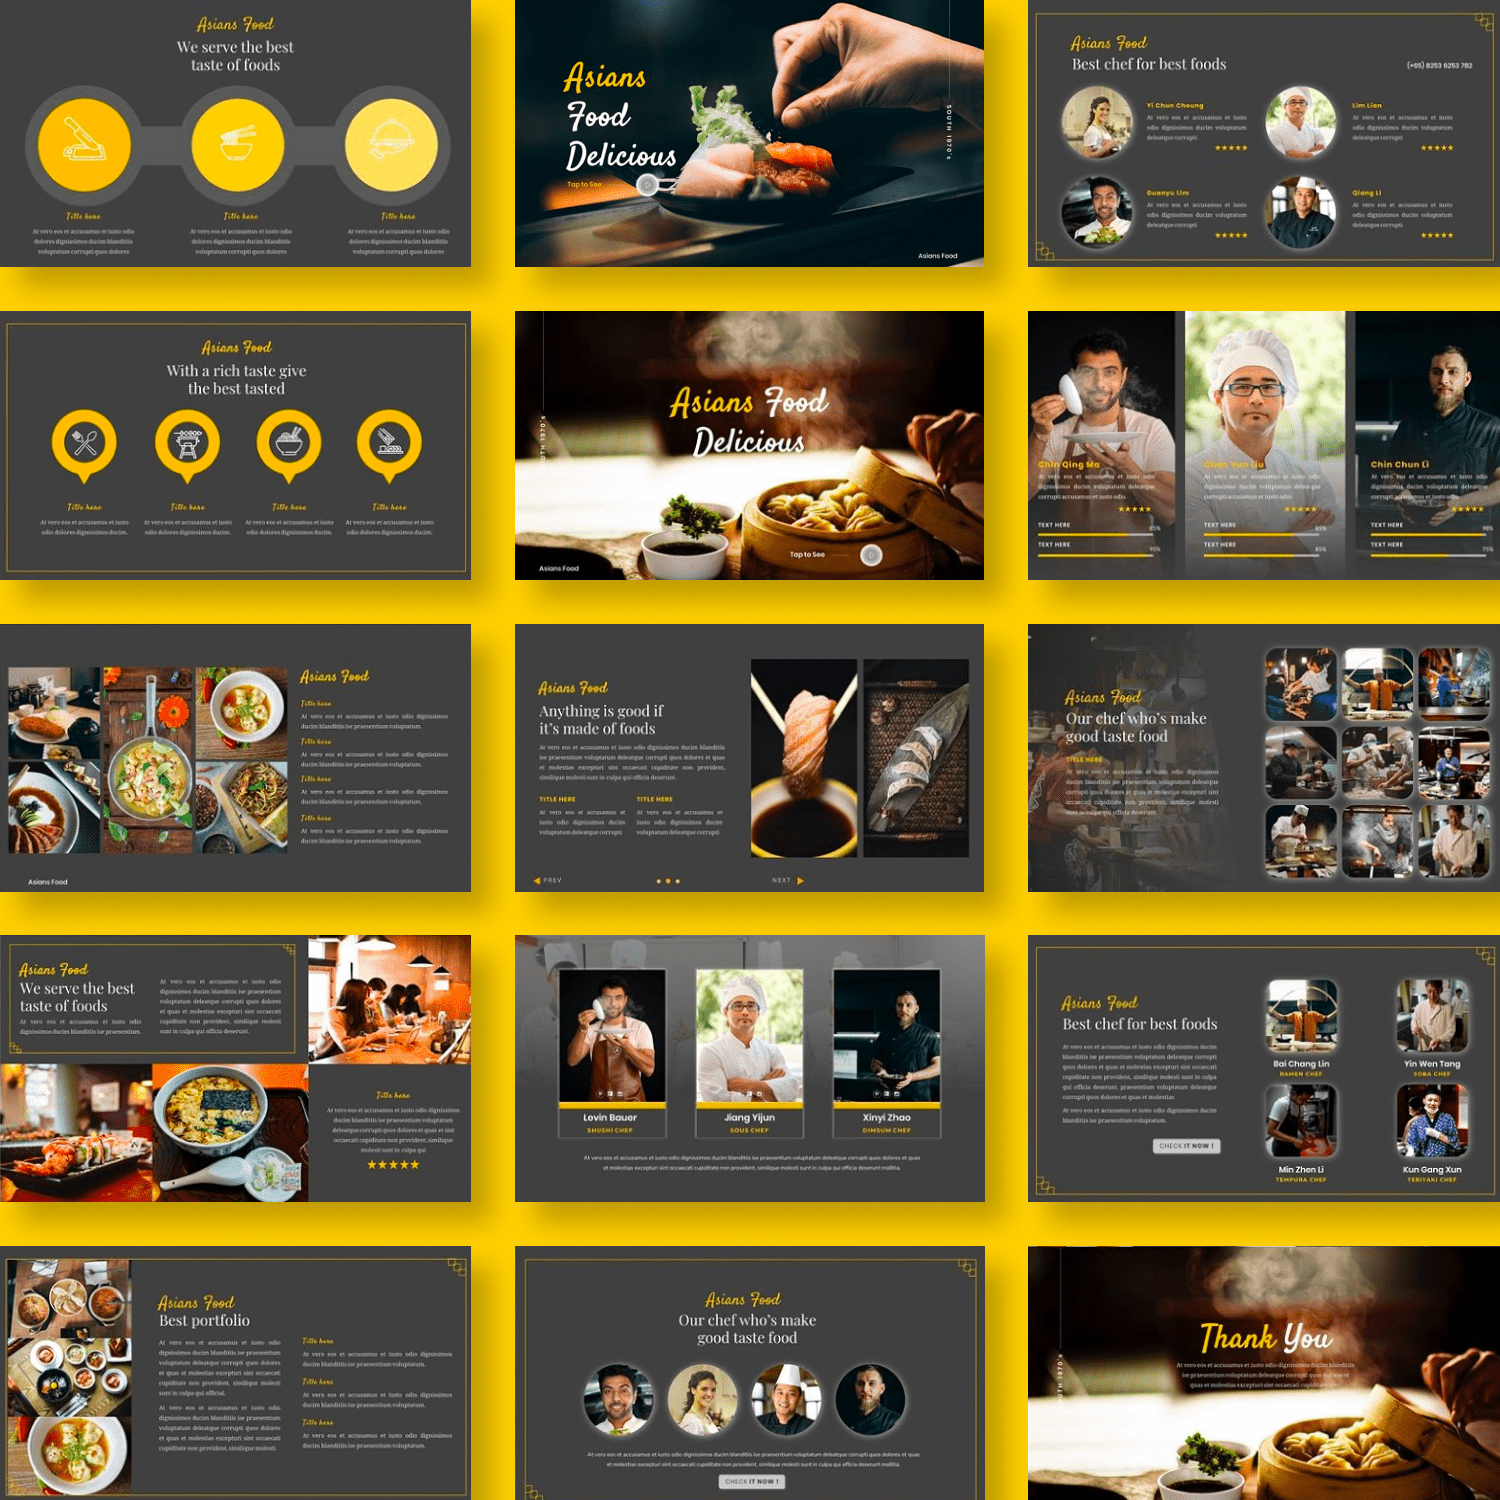 Asians Food - Food PowerPoint by MasterBundles Collage Image.